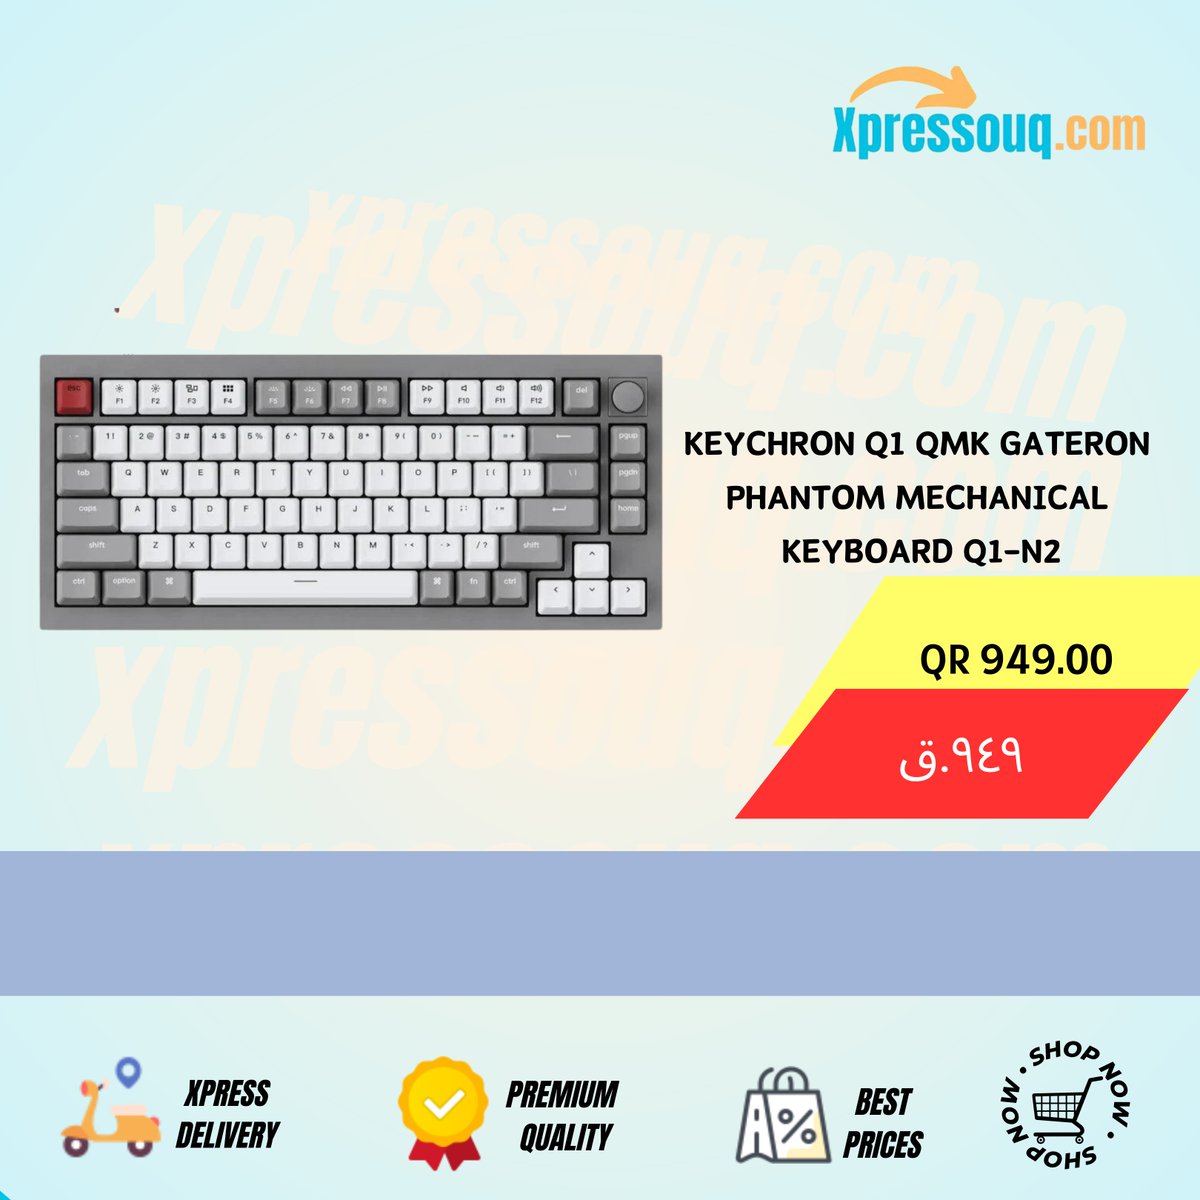 Type smarter, type faster. KeychronQ1

🎯Order Now @ Just QR 949 only 🏃🏻‍
💸Cash on Delivery💸
🚗xpress Delivery🛻

xpressouq.com/products/keych…

#KeychronQ1Qatar #MechanicalKeyboardQatar #Q1N2Qatar #QatarTech #QatarGadgets #QatarKeyboard #CustomKeyboardQatar #QatarProductivity